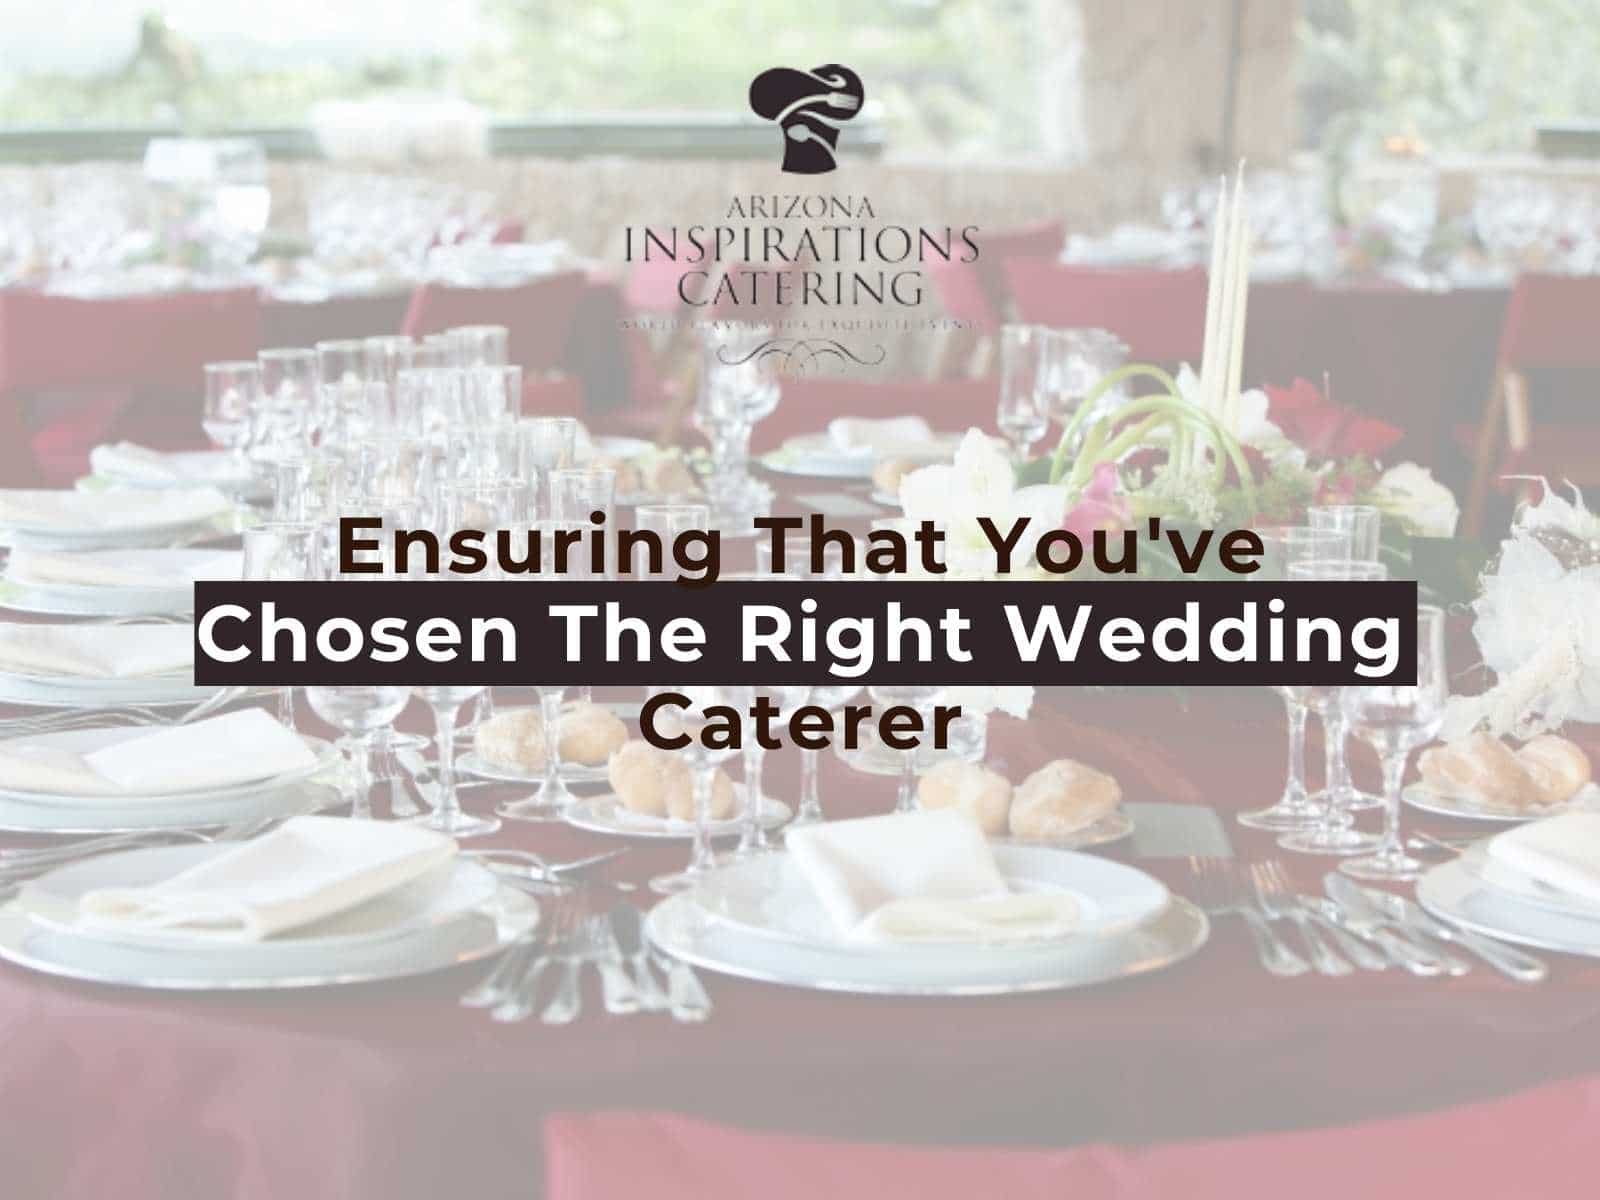 Ensuring That You've Chosen The Right Wedding Caterer